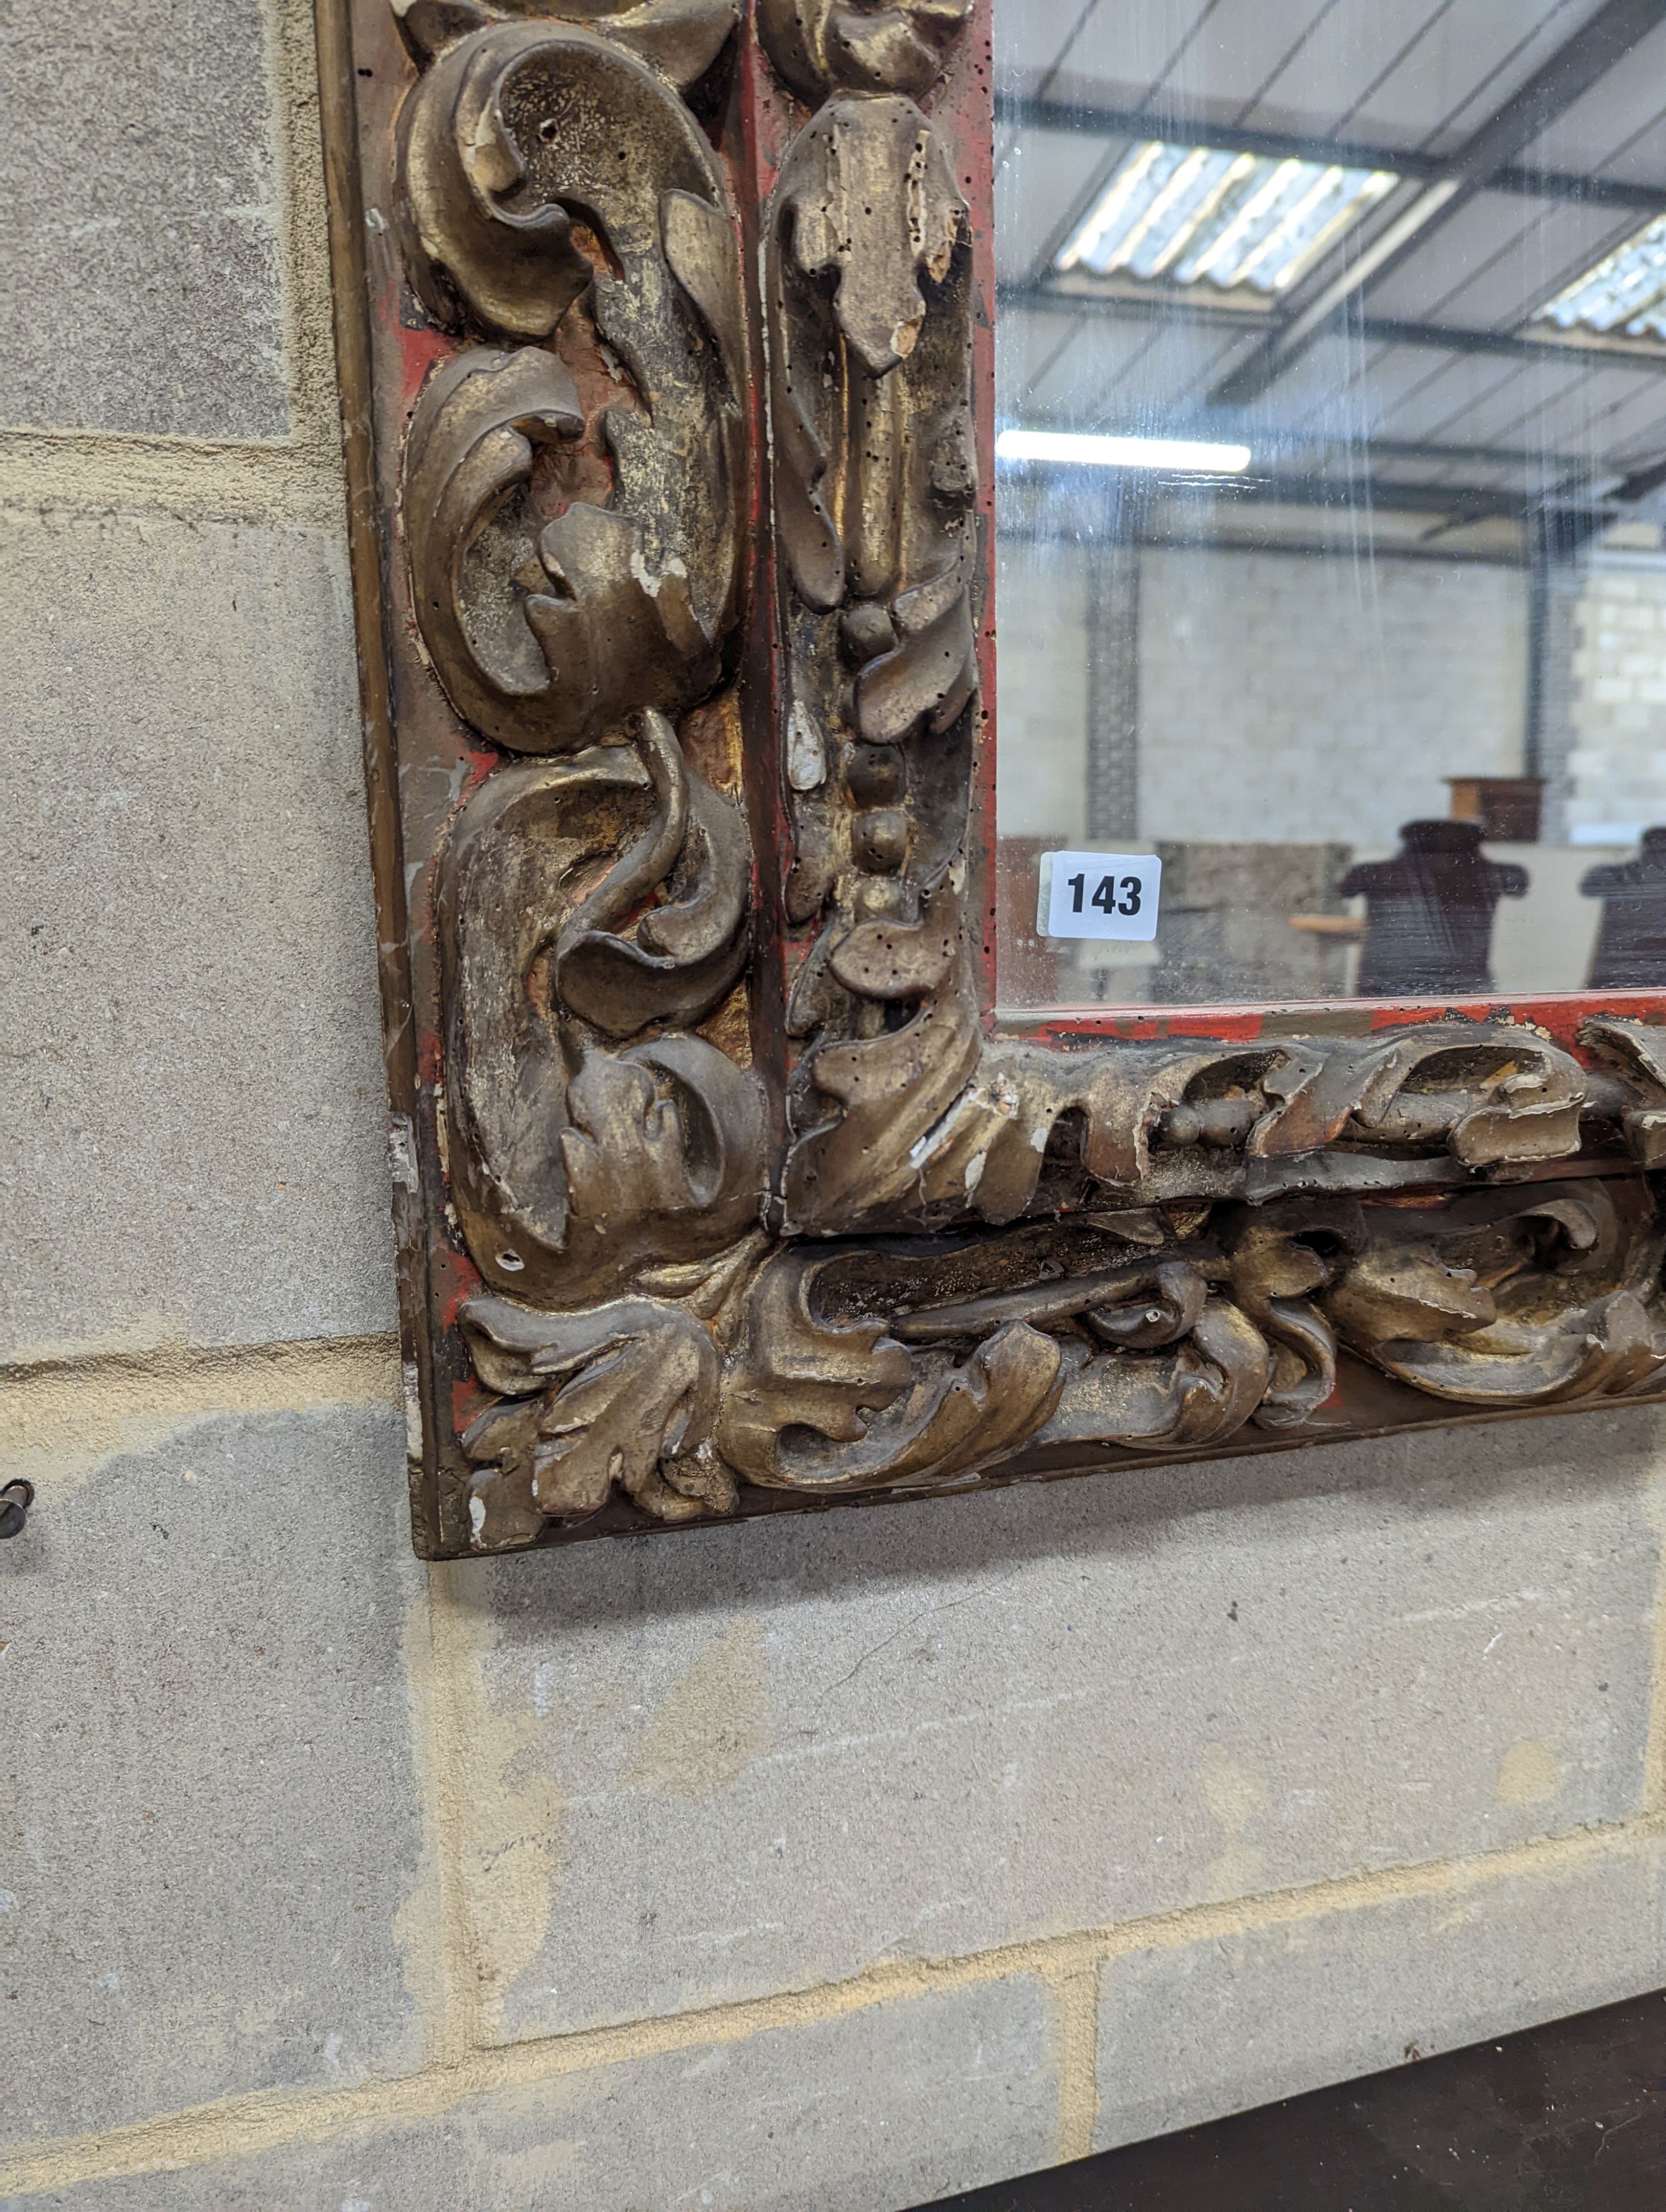 A 19th century carved giltwood rectangular wall mirror, width 140cm, height 76cm